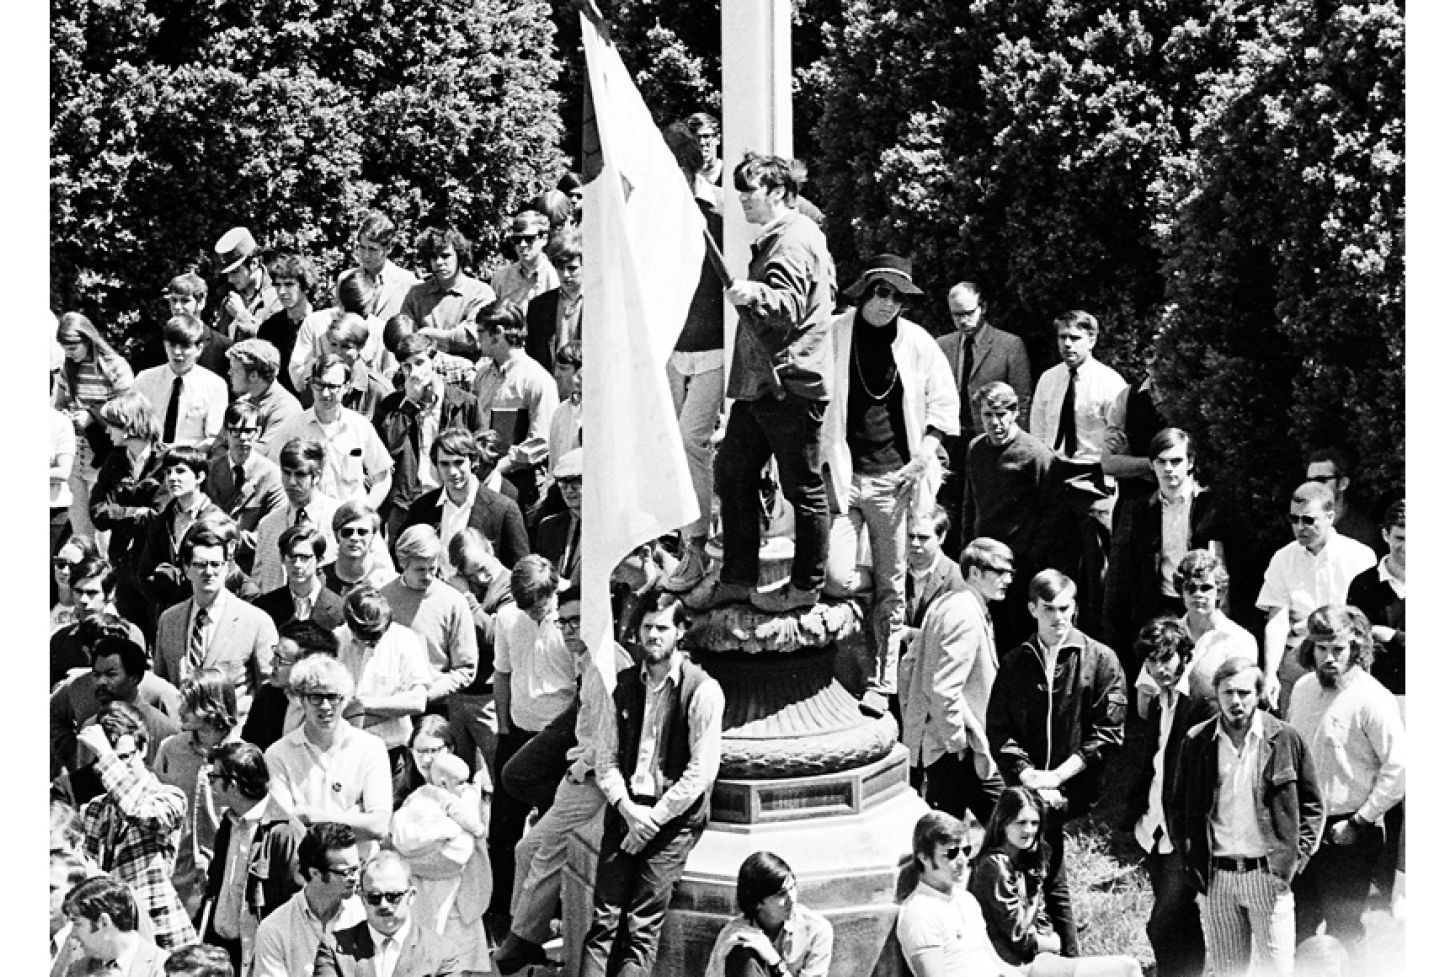 In May 1970, the American invasion of Cambodia and the slaying of students by National Guardsmen at Kent State University led to strikes and protests by students on college campuses across the country, including at UVA. During a May 6 rally at the Rotunda, law students served as marshals and attempted to control the strike chaos, protect people and property, and advise students as needed on their rights. Later, Donald Santarelli ’62 and Thomas M. Boyd ’72 helped rewrite the UVA student code of conduct to be